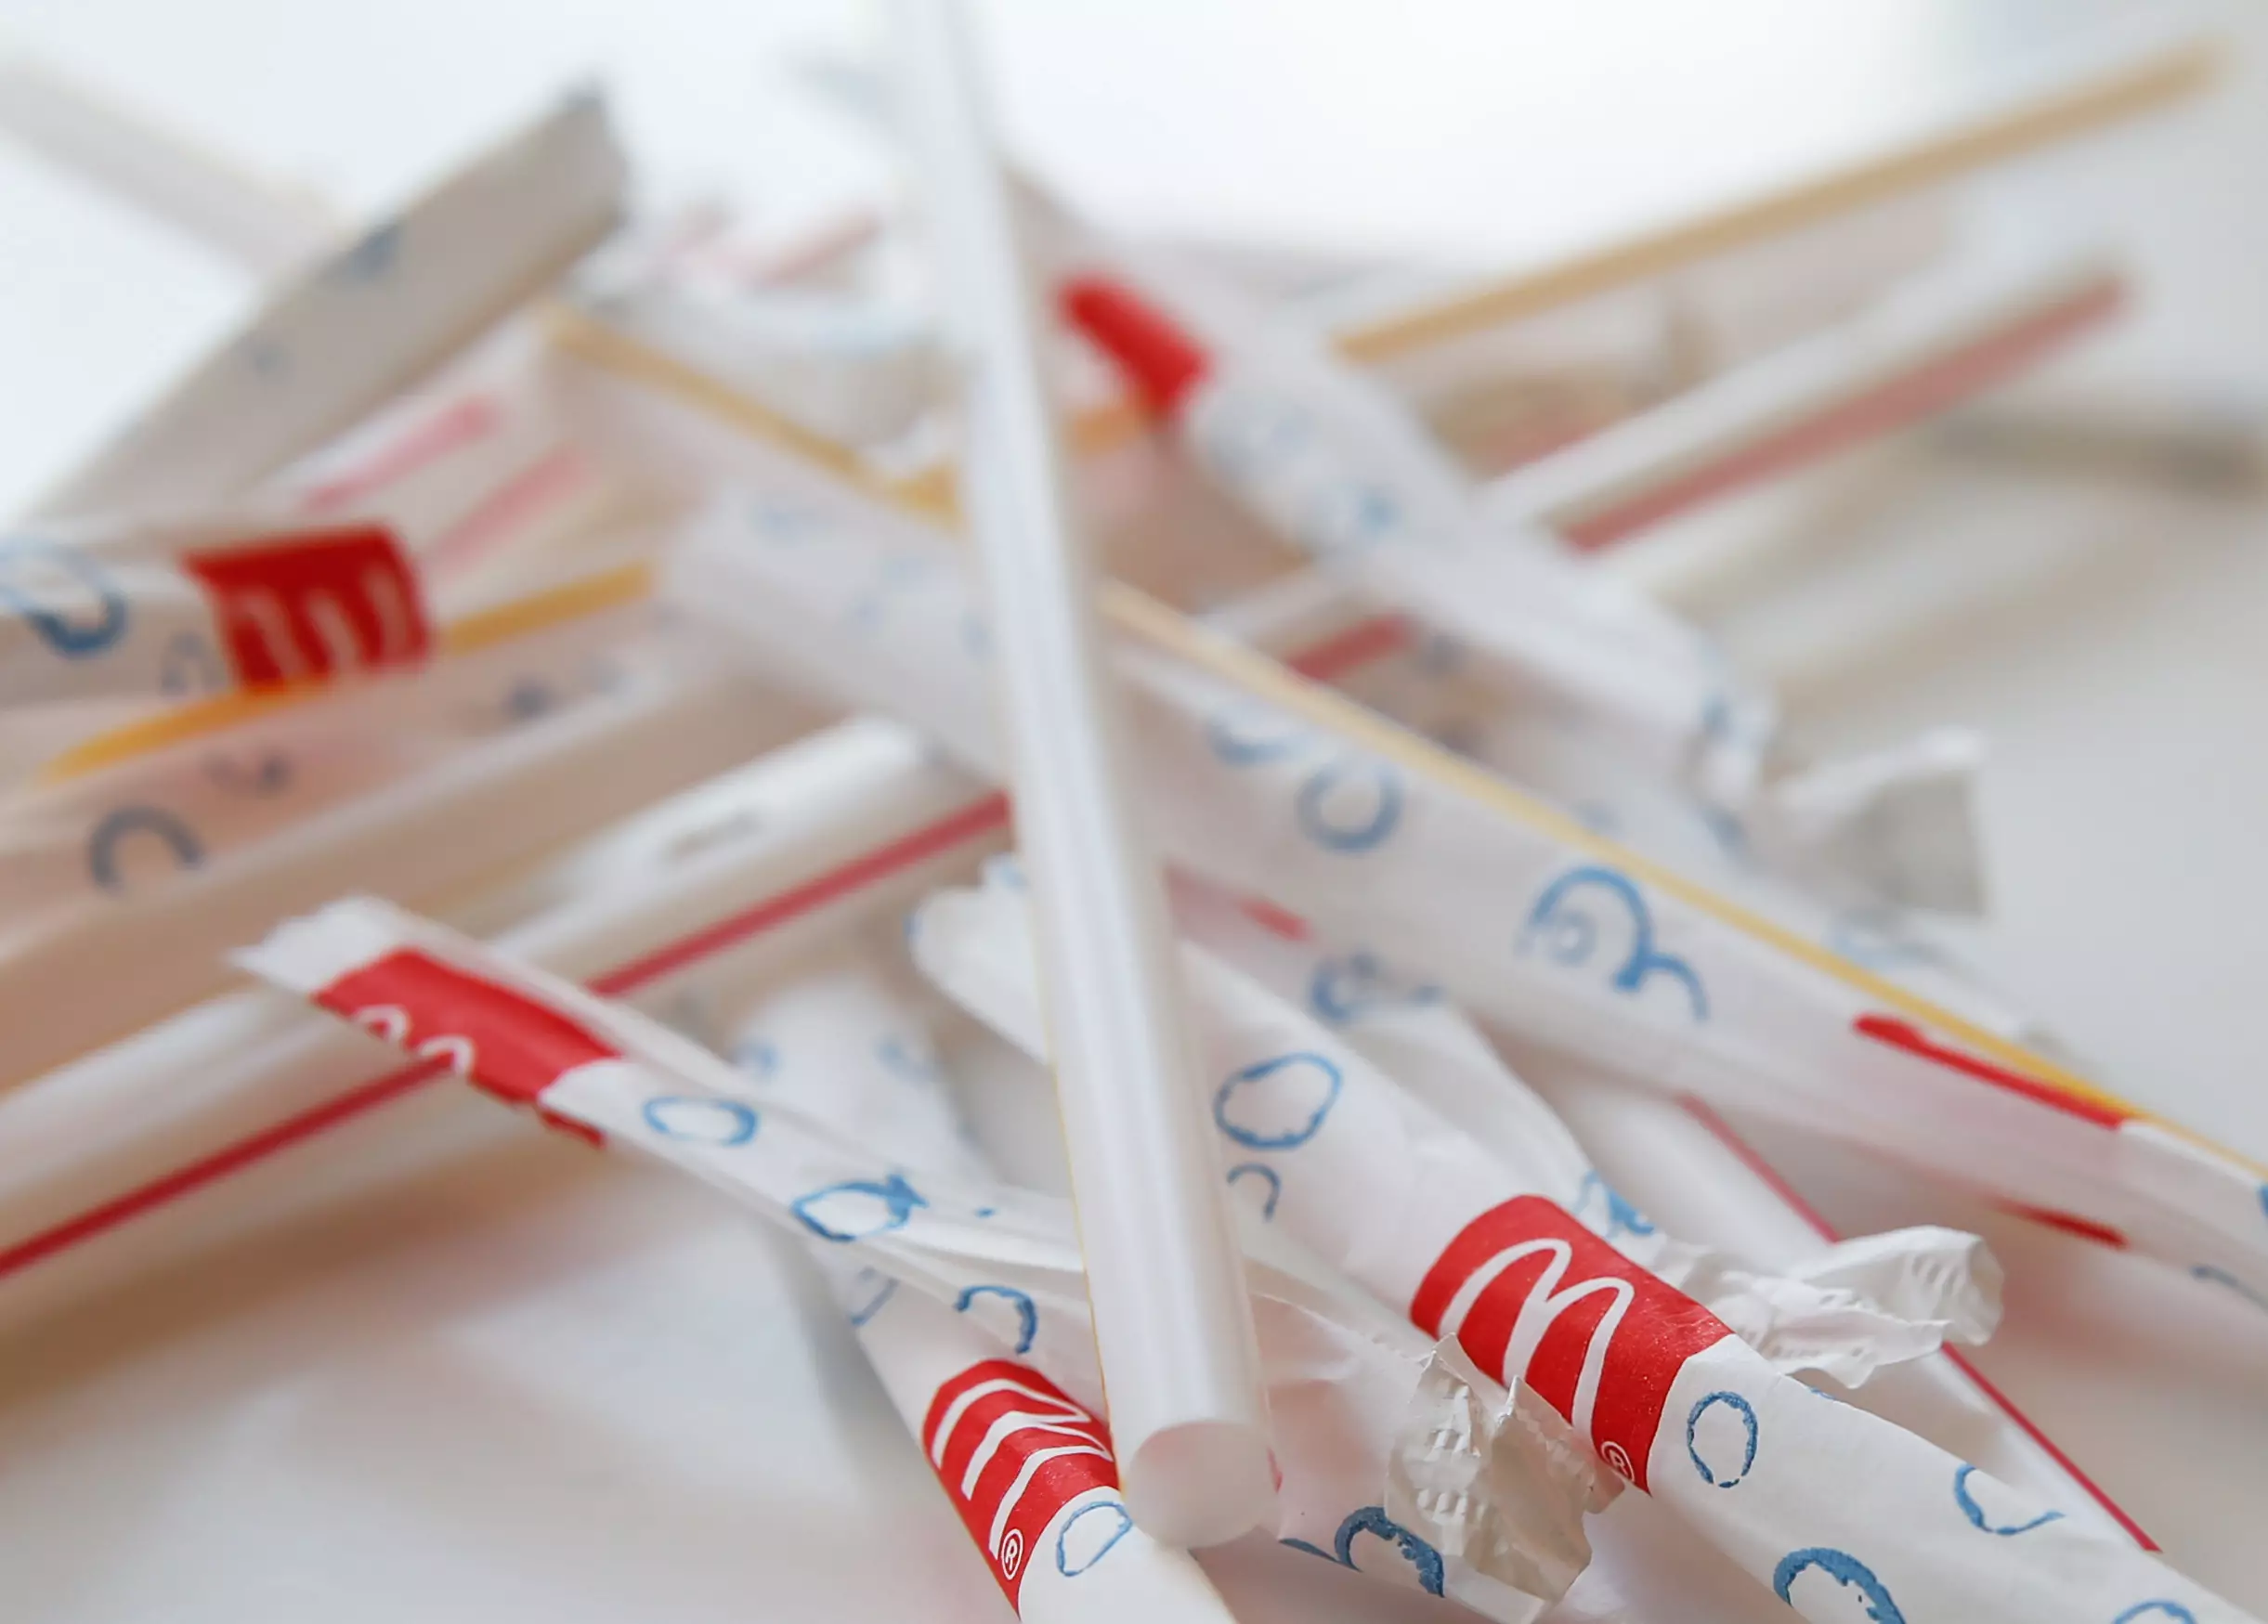 A leaked memo has revealed McDonald's paper straws cannot currently be recycled.